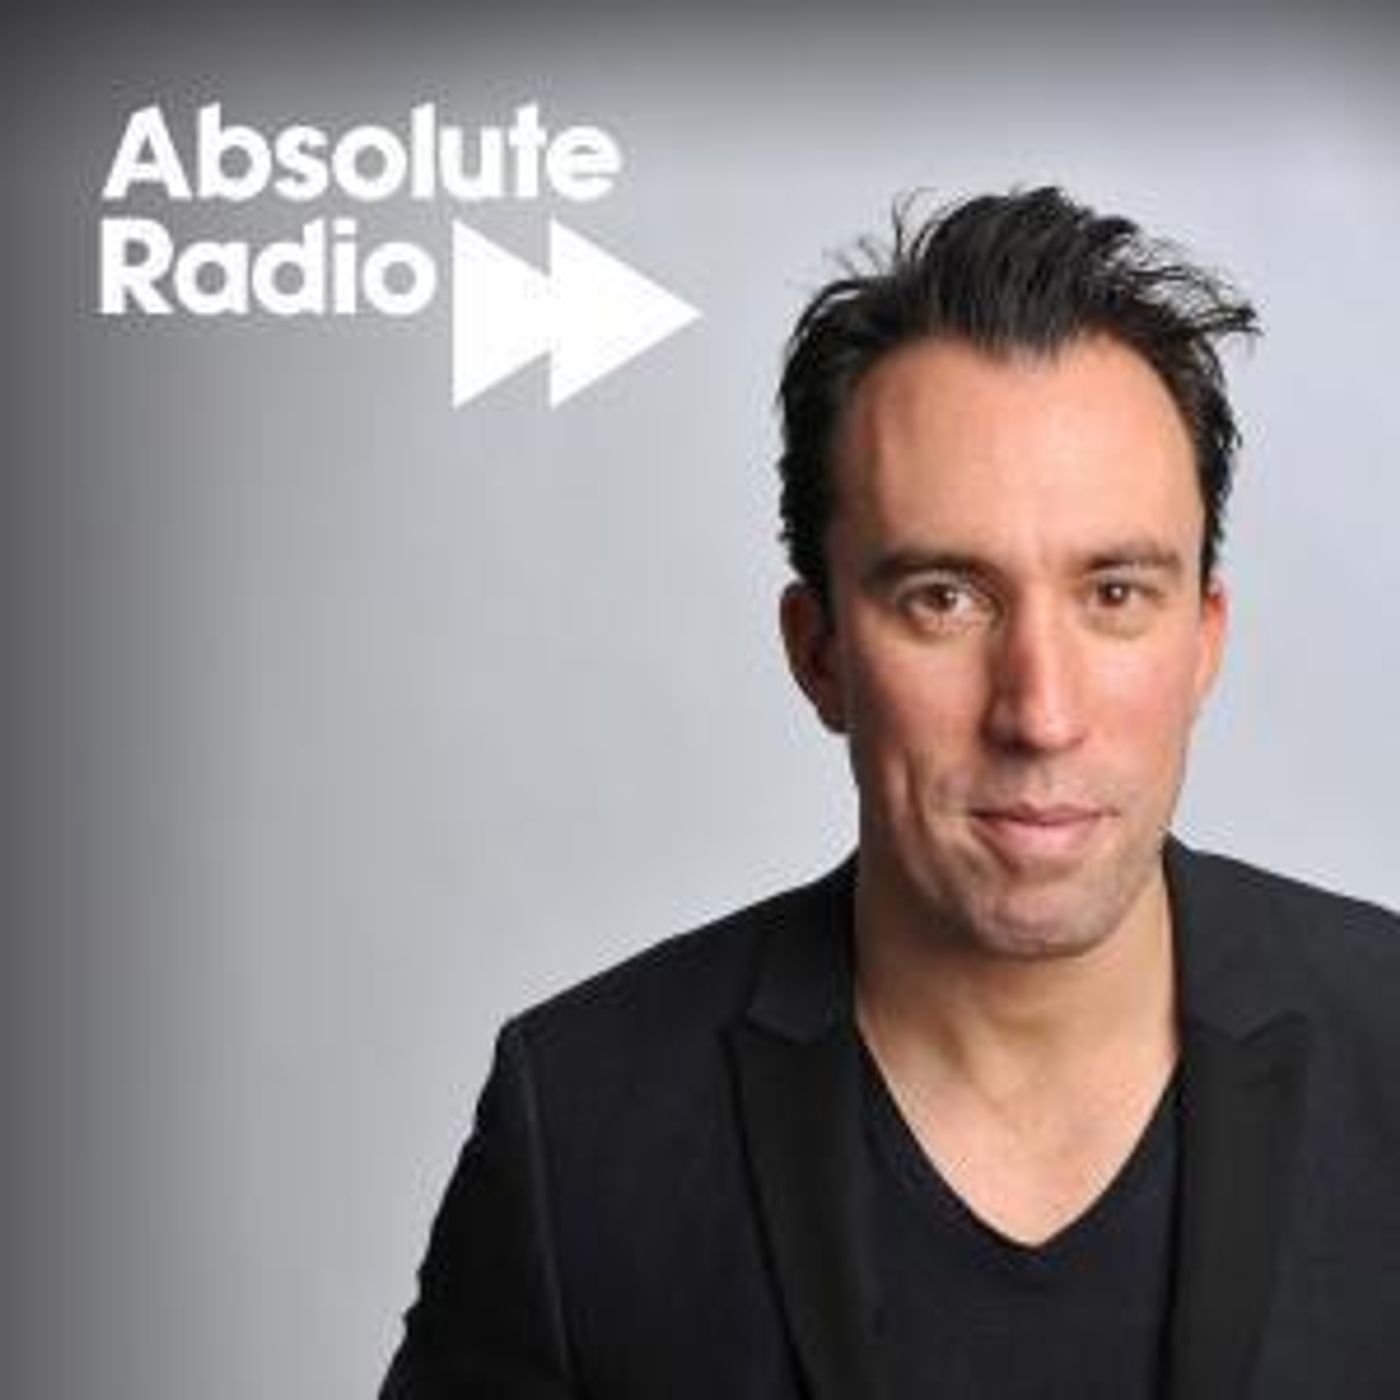 1430: Christian O'Connell announces Absolute departure